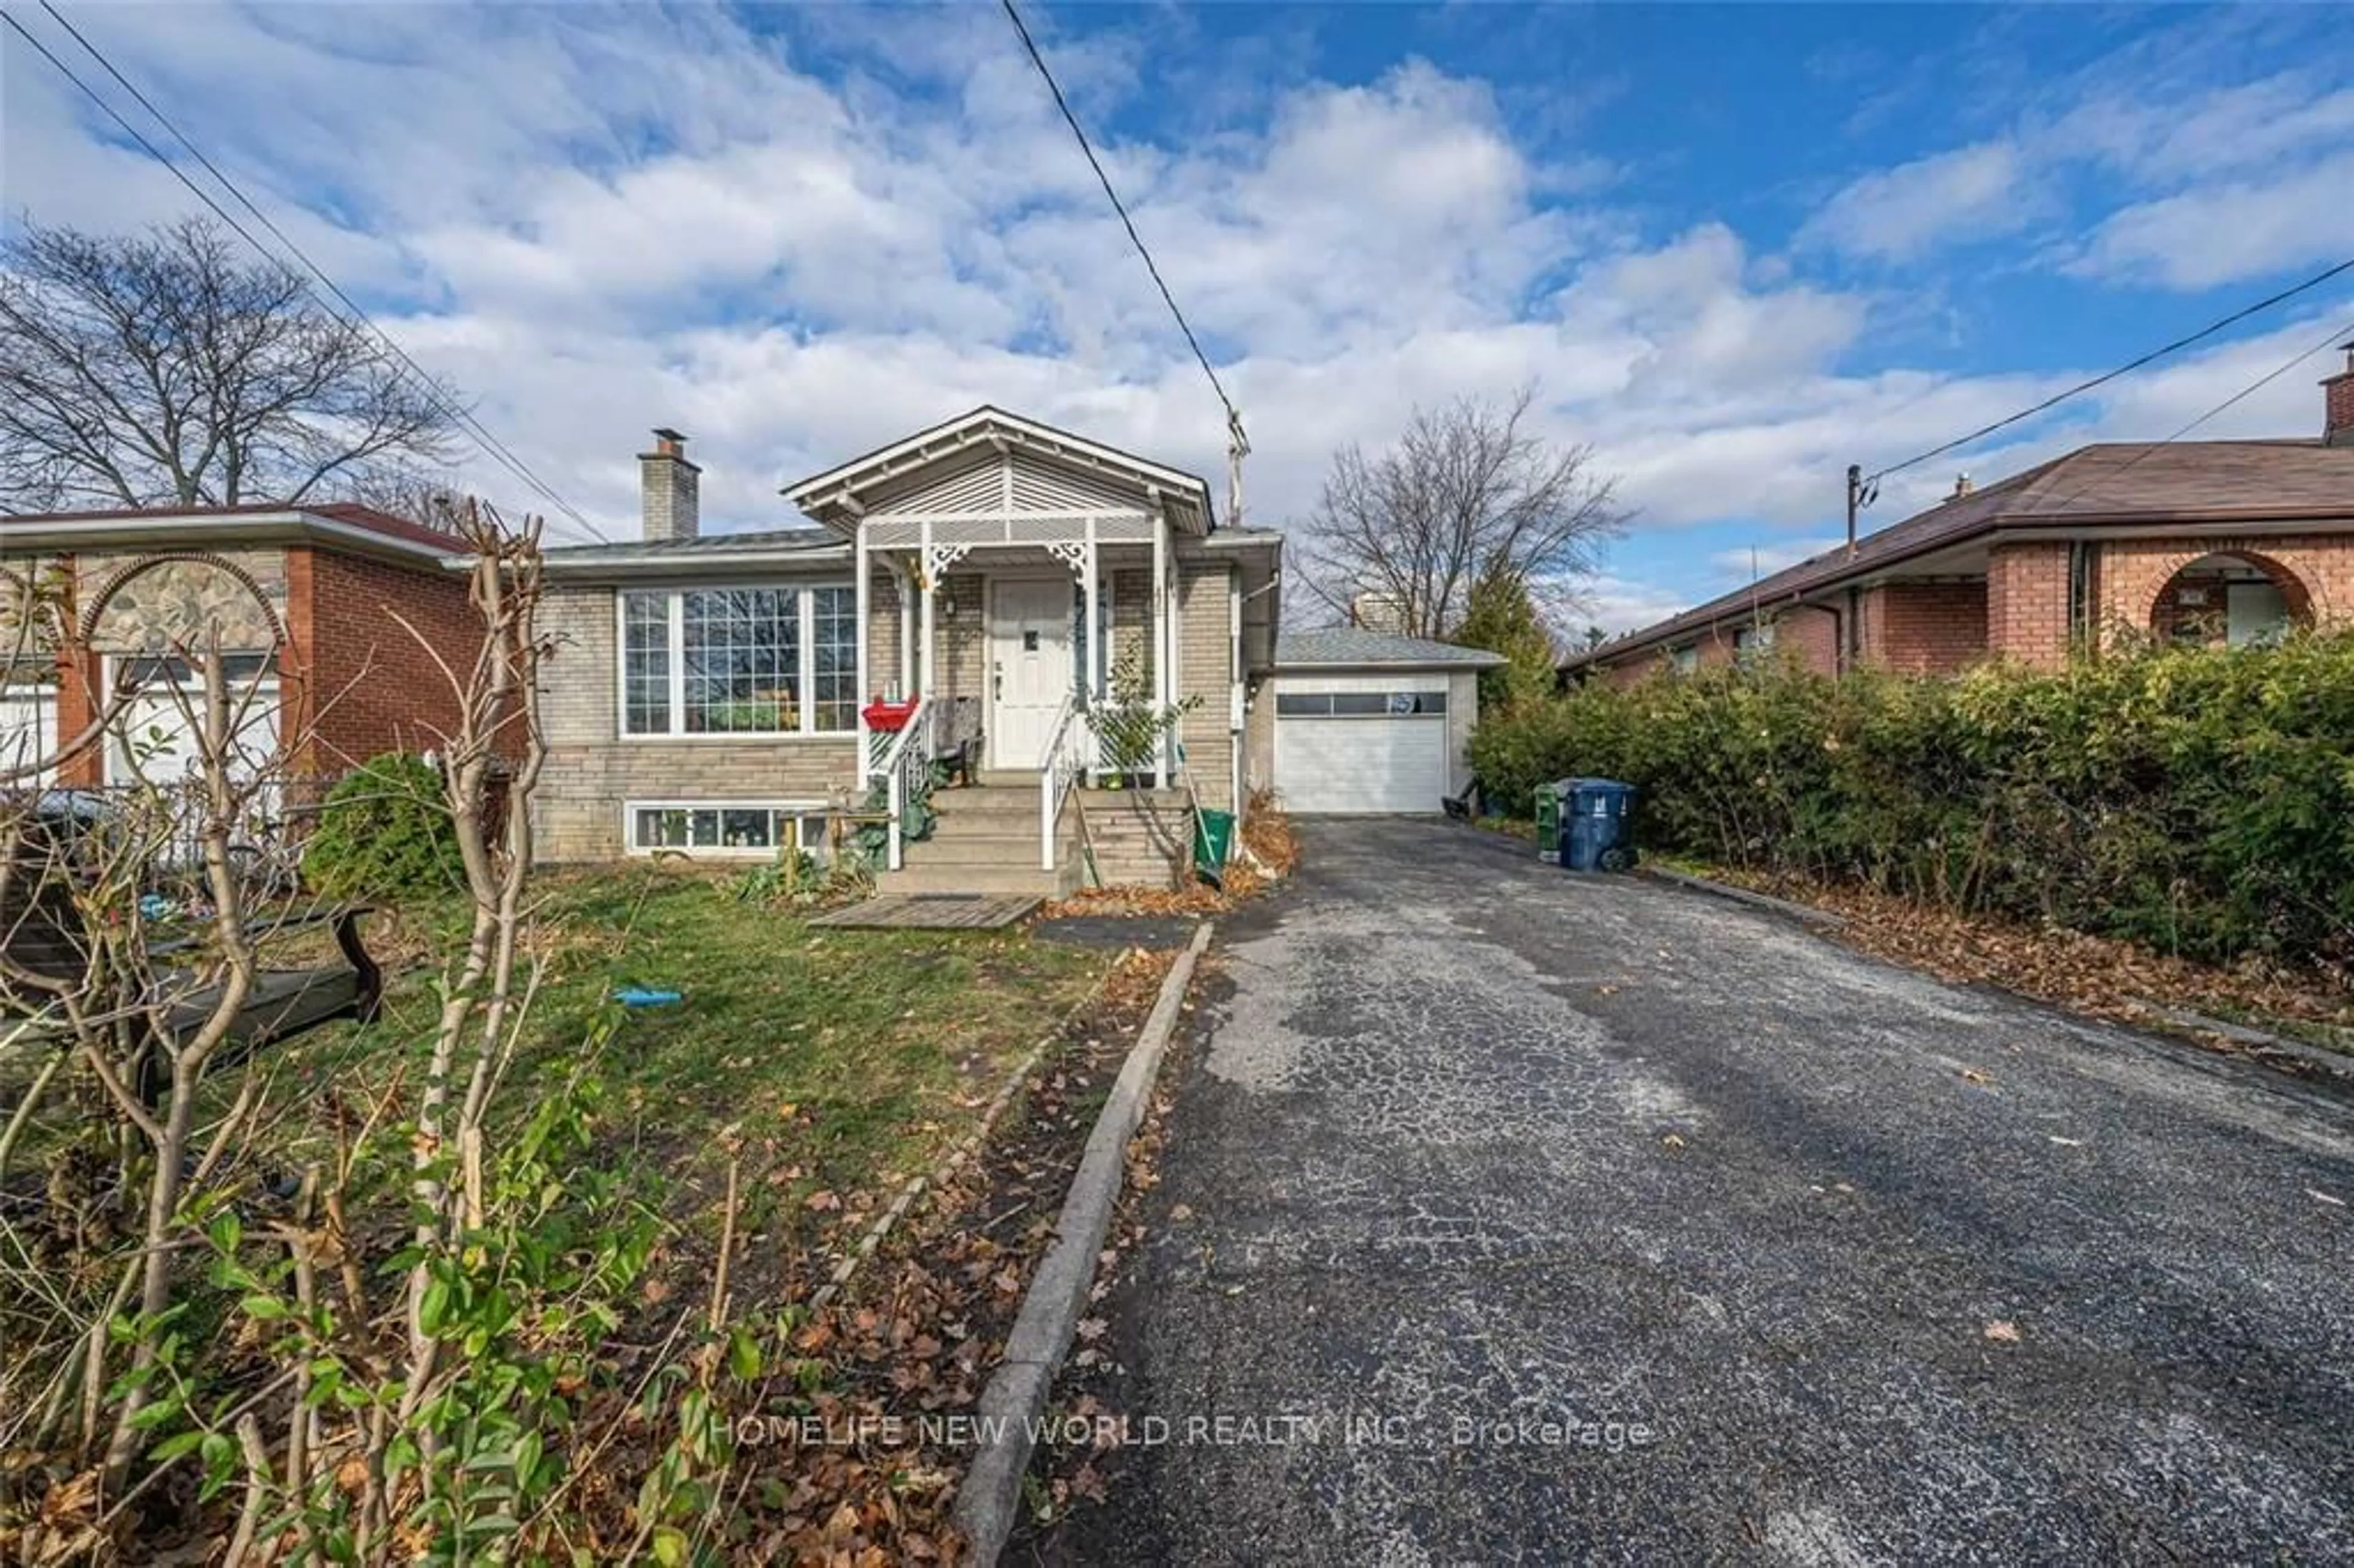 Frontside or backside of a home for 146 Pleasant Ave, Toronto Ontario M2M 1M1